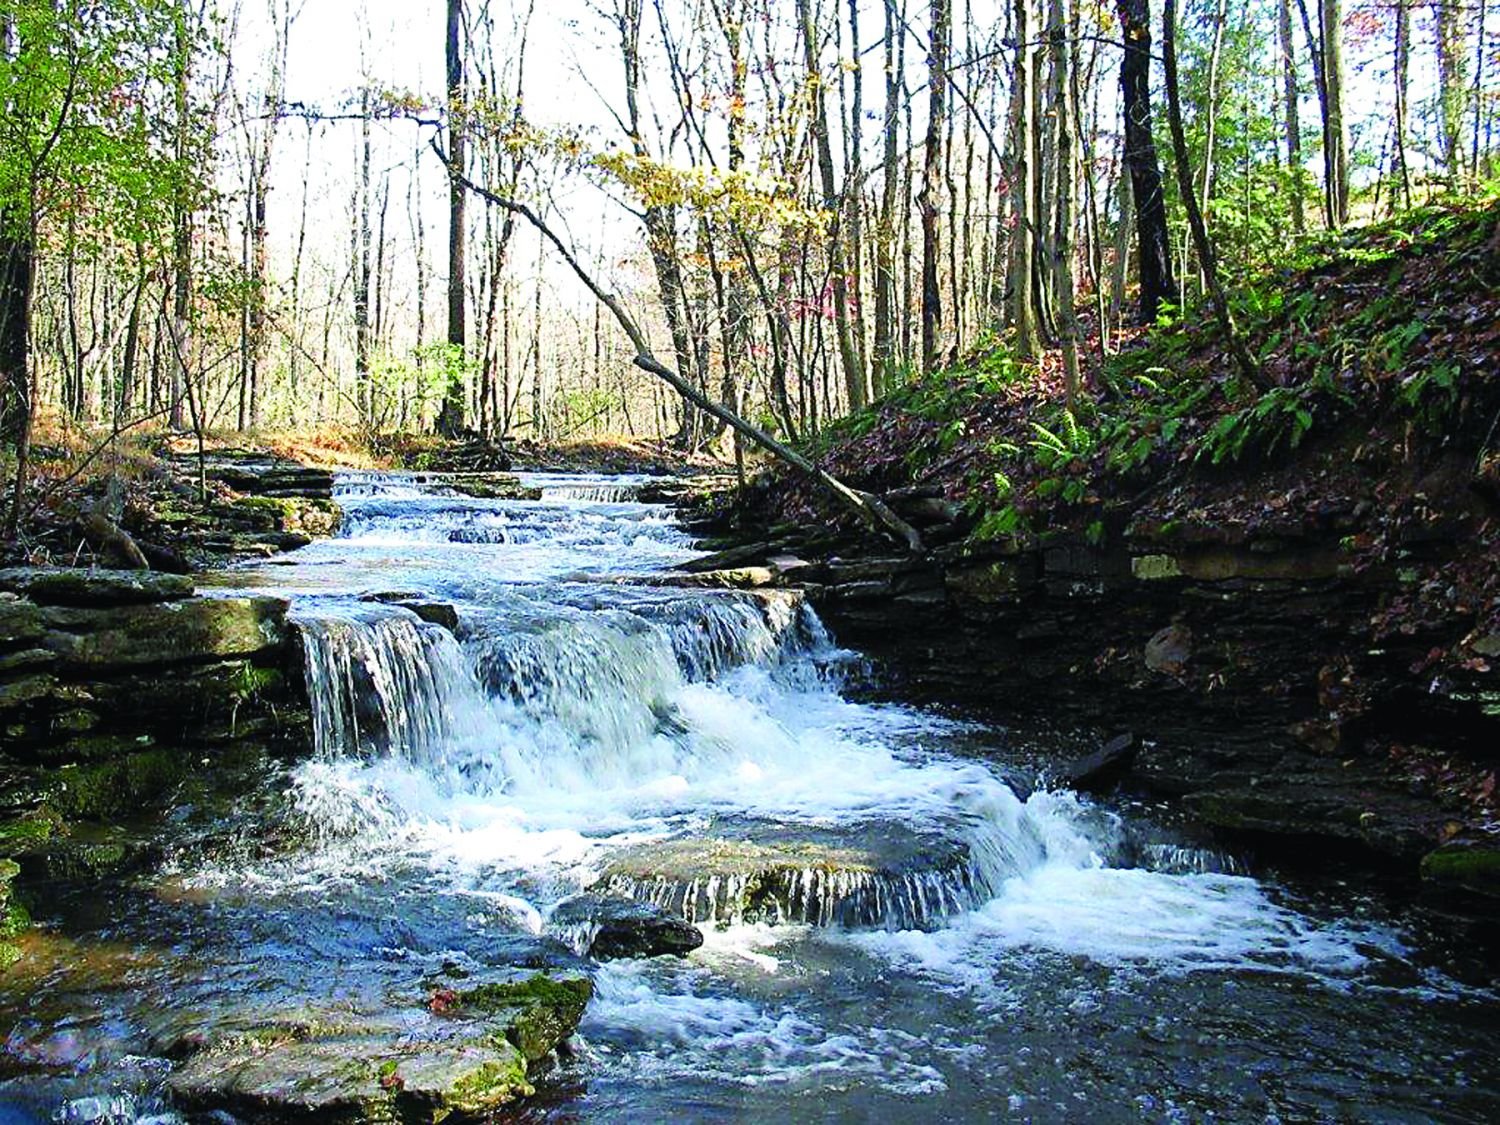 The Little Tinicum Creek runs along the back of the Kyde property. “This is one of the reasons I work to protect watersheds,” Martie Kyde says.